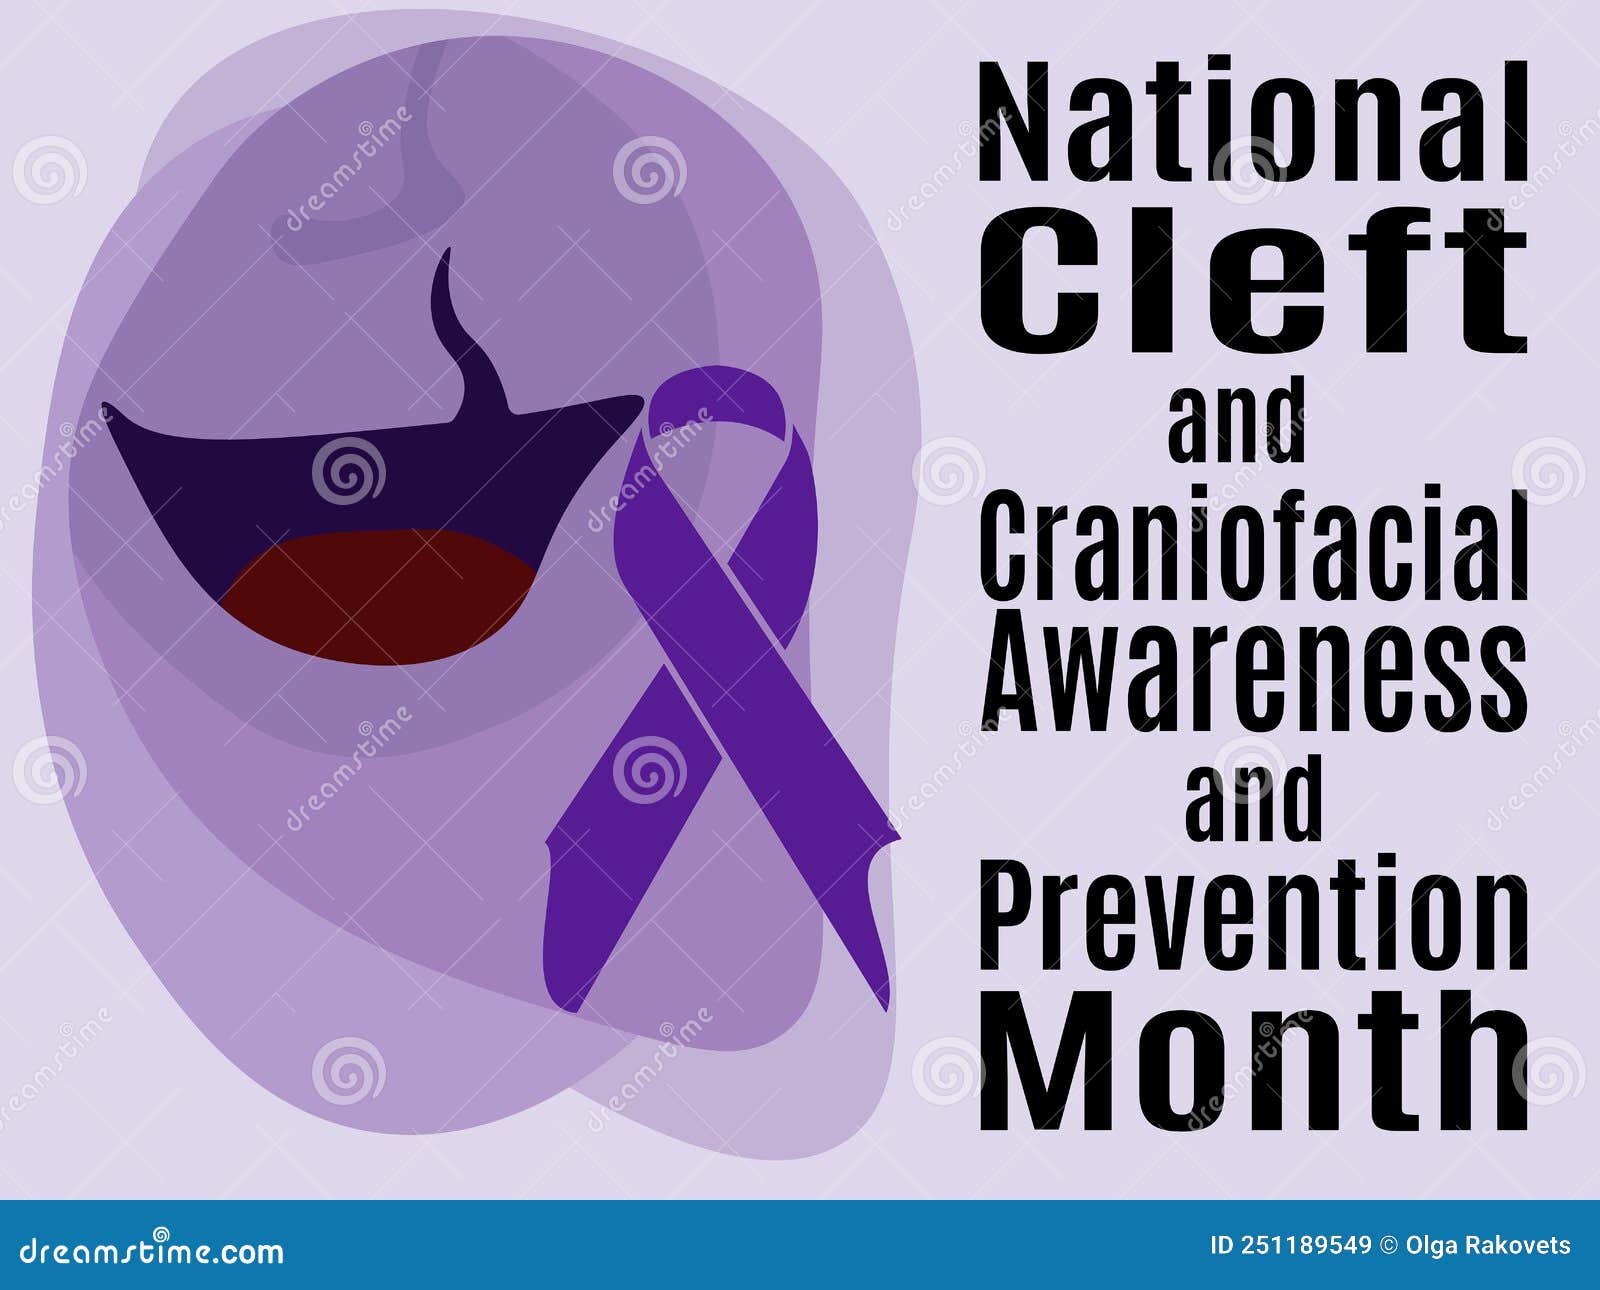 national cleft and craniofacial awareness and prevention month, idea for a poster, banner, flyer or postcard on a medical theme